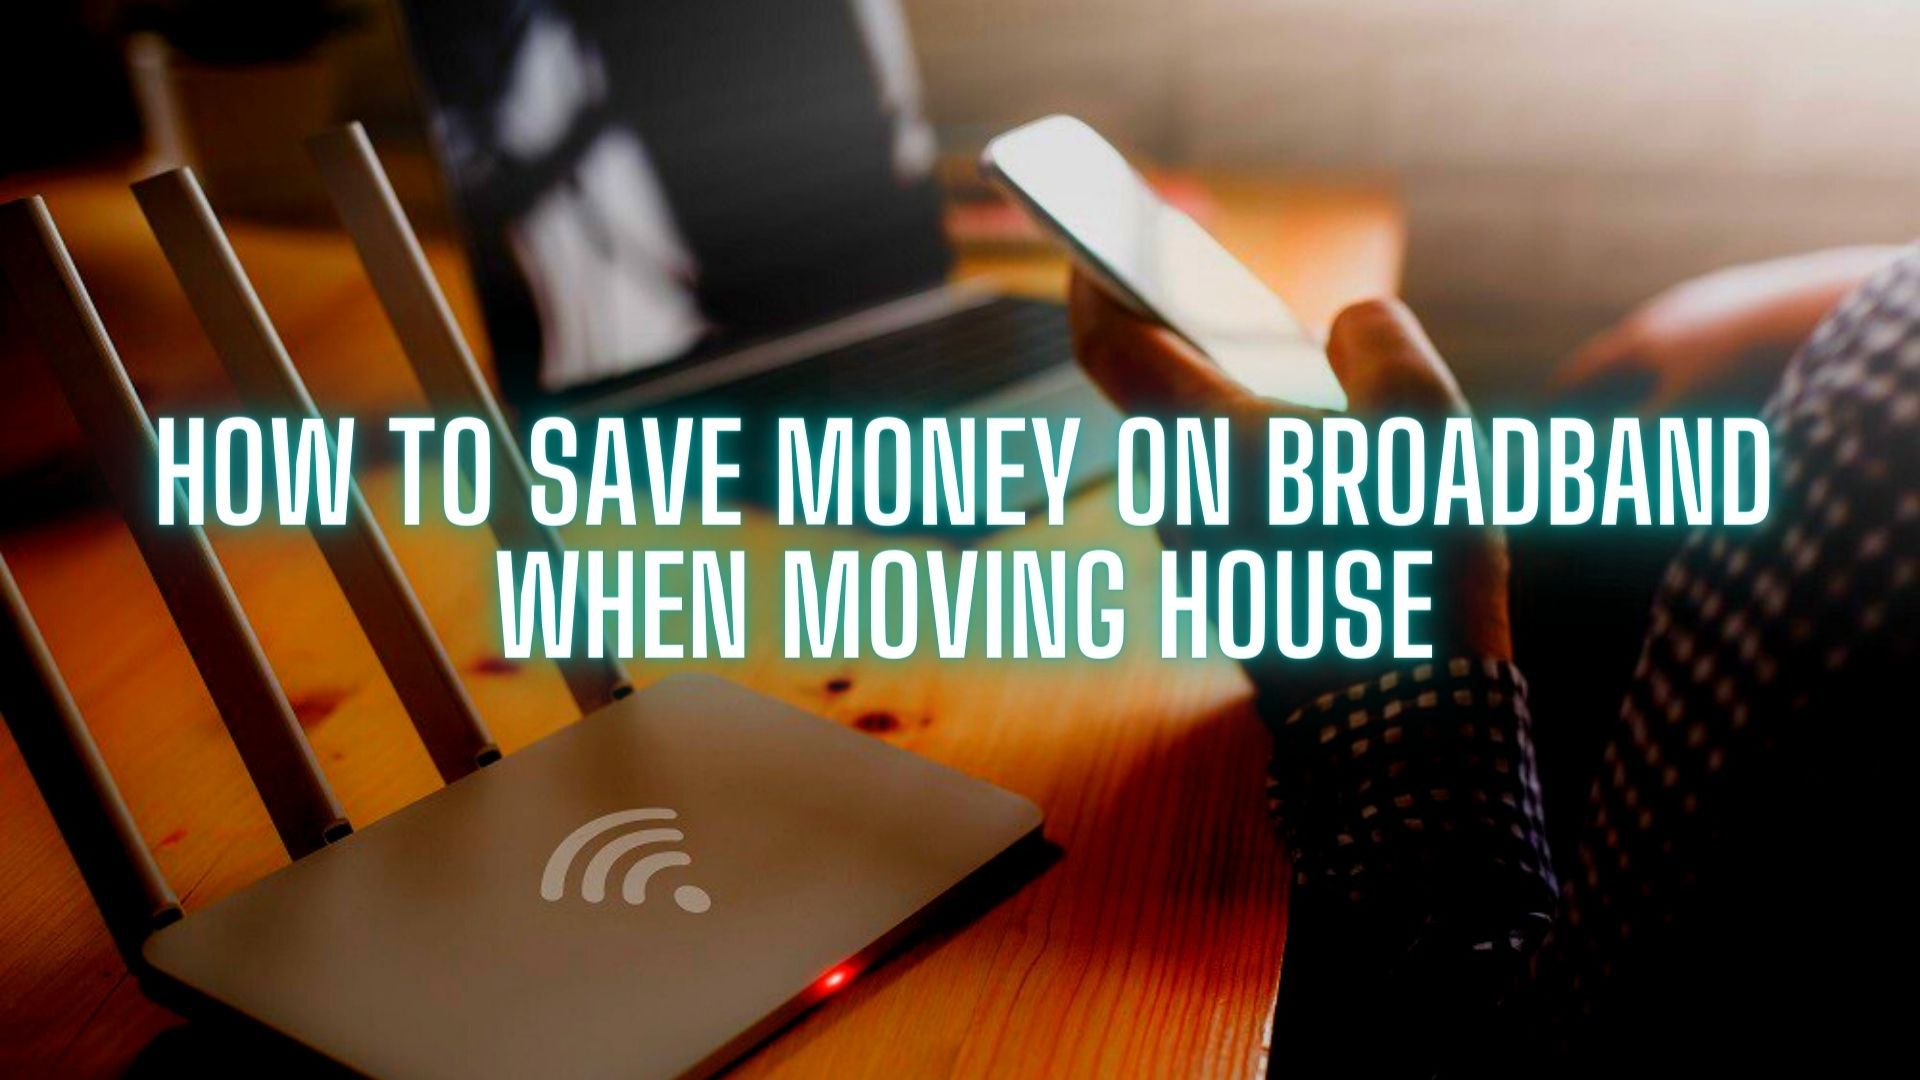 How To Save Money On Broadband When Moving House